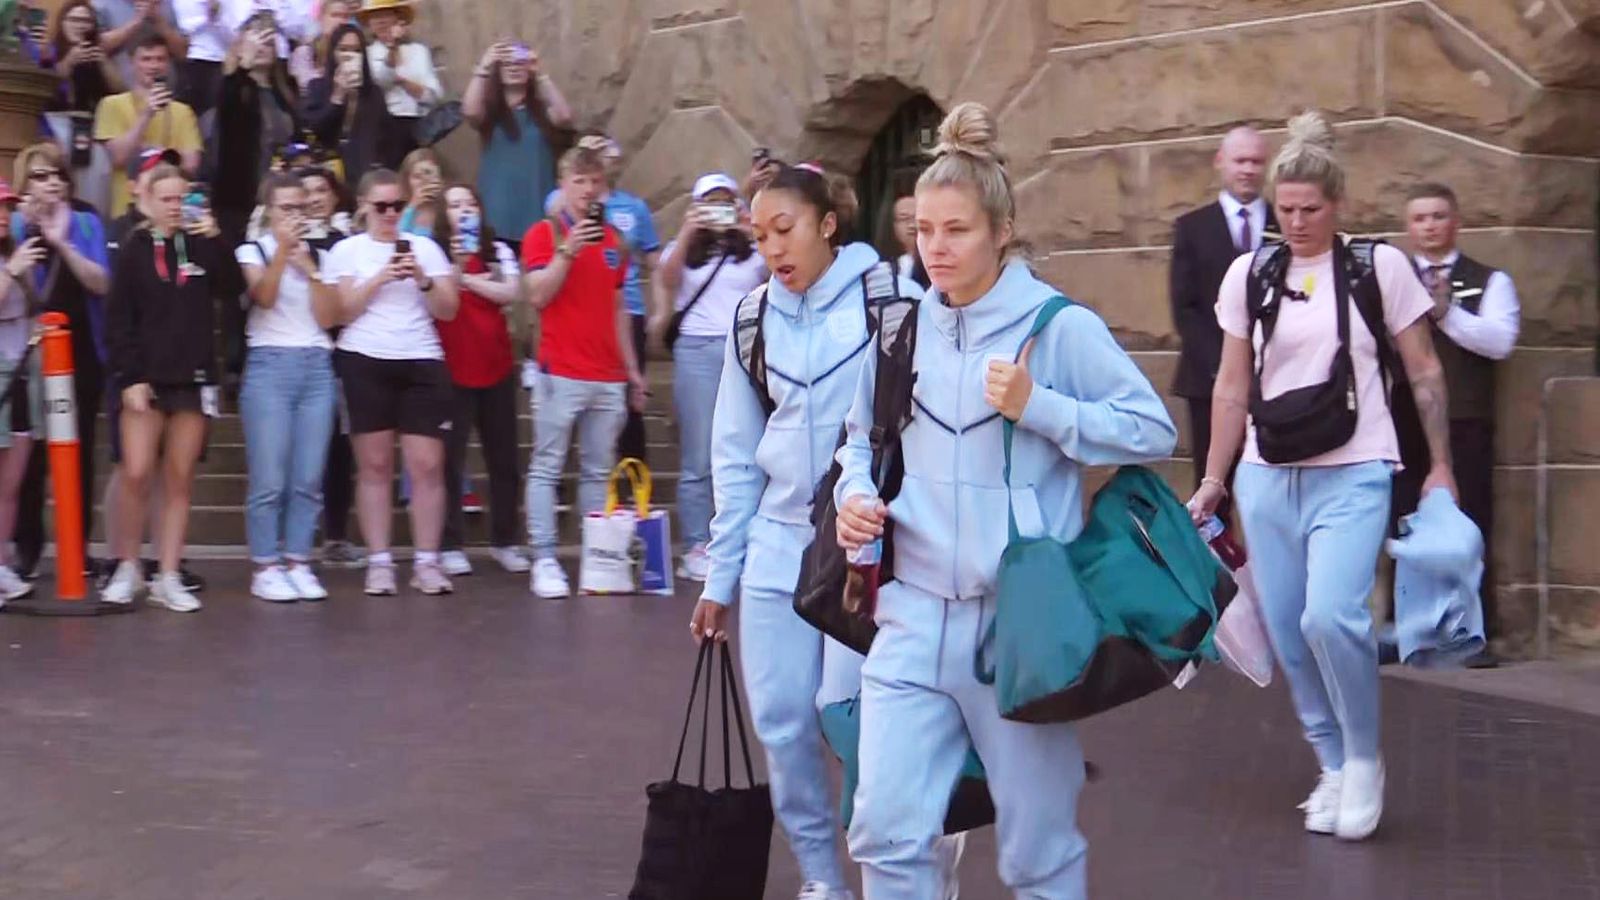 Lionesses fly home: England team heading back from Australia after Women's World Cup final defeat to Spain